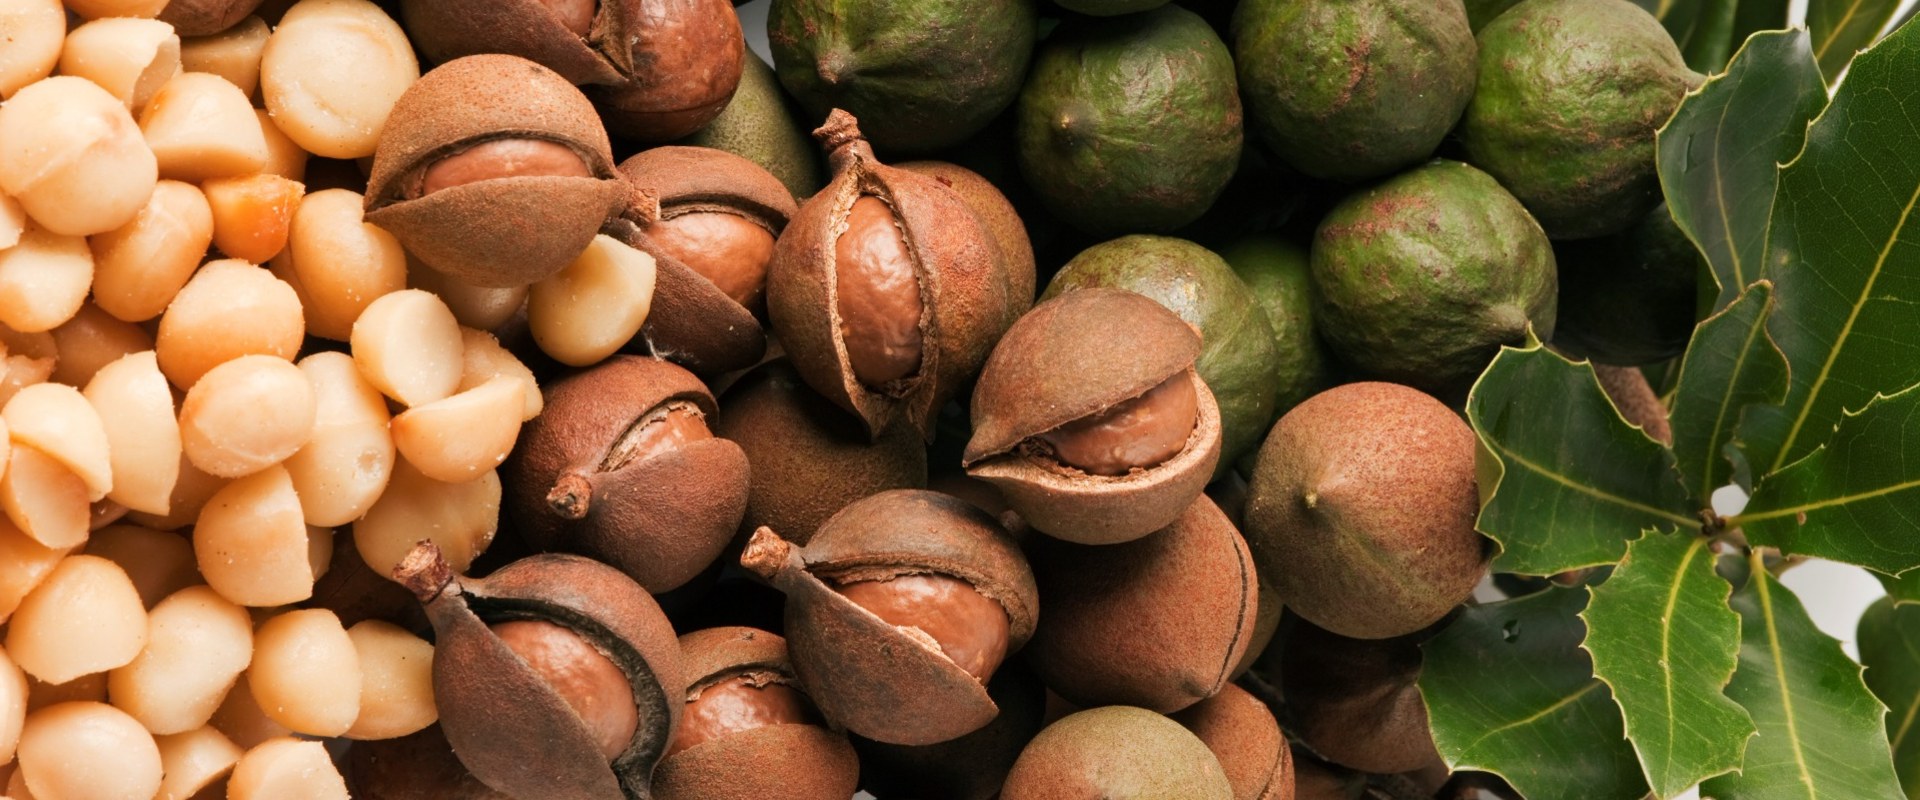 Why are macadamia nuts so expensive?